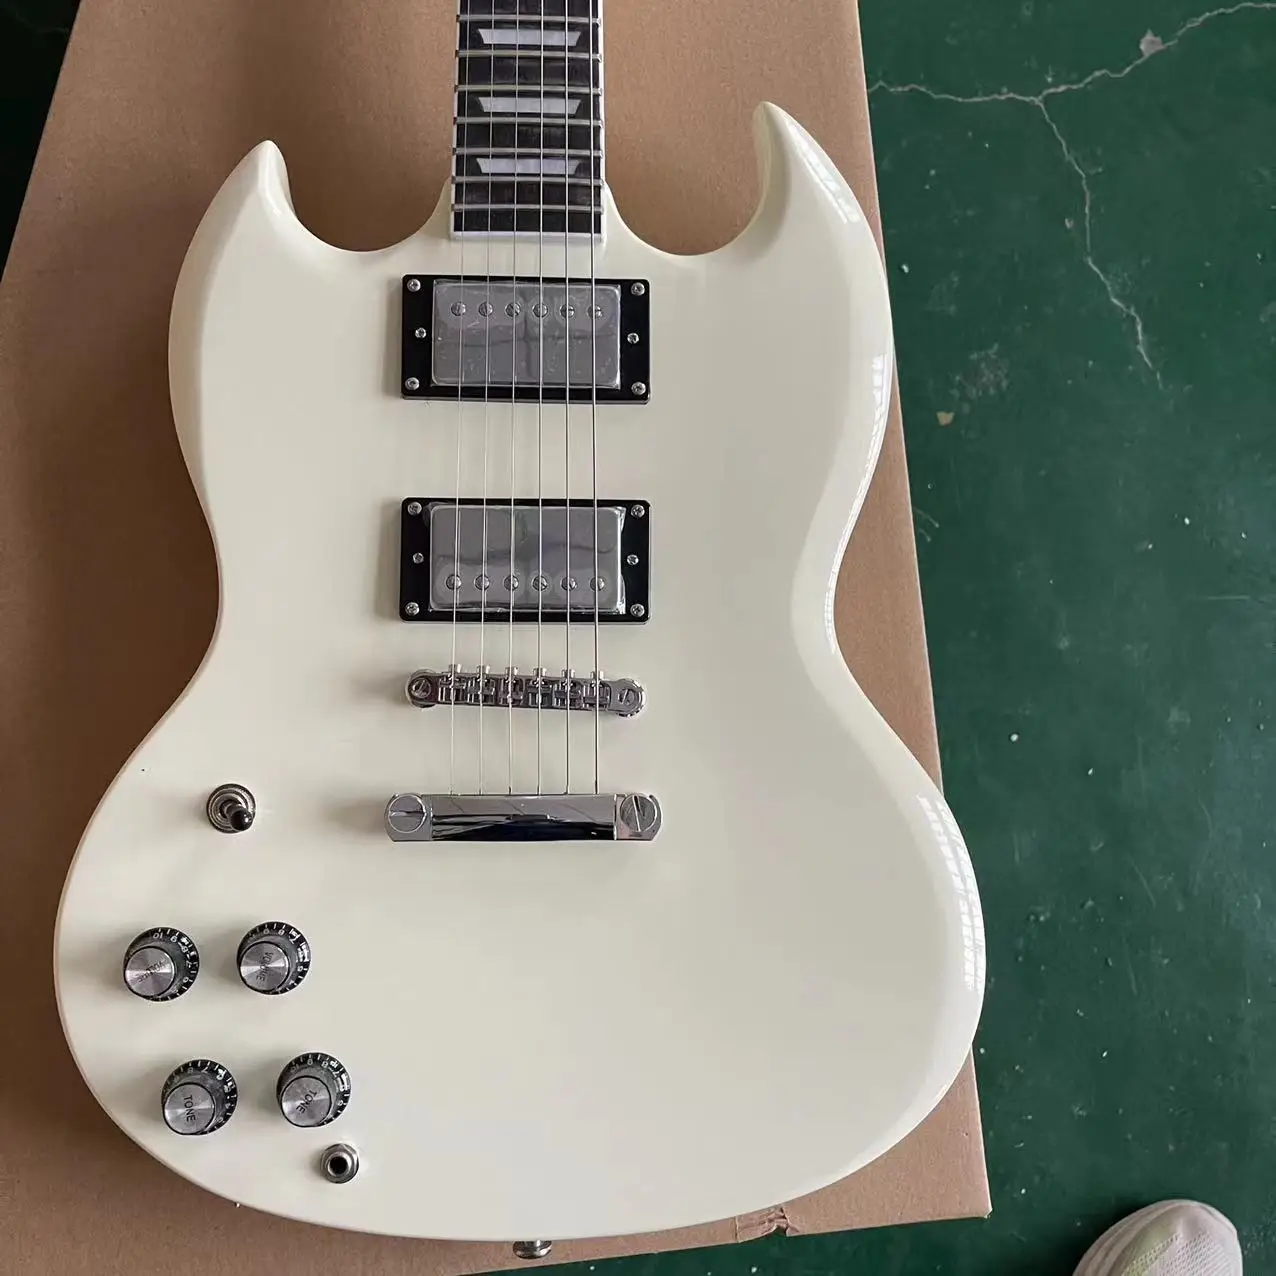 

SG left hand all-in-one electric guitar, creamy yellow body mahogany, LP pickup, LP string bridge, rosewood fingerboard flowerpo